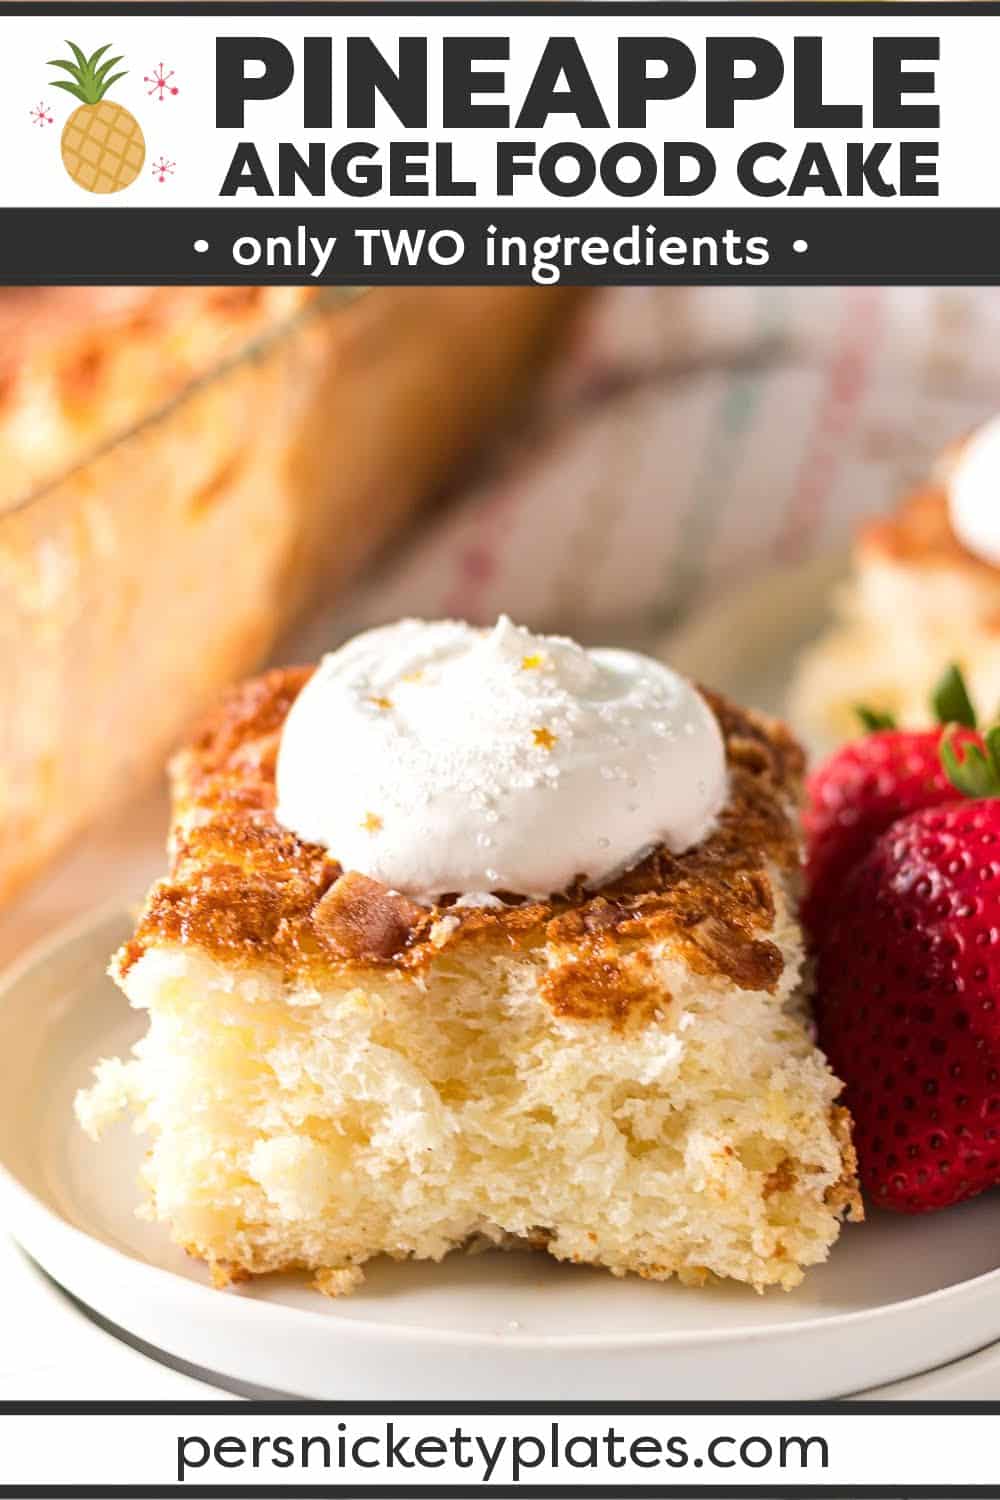 This easy Pineapple Angel Food Cake is made with just two ingredients, one bowl and one spoon. This fluffy and delicious cake is topped with toasted coconut, a little bit of brown sugar, and is perfect with a dollop of whipped cream. | www.persnicketyplates.com